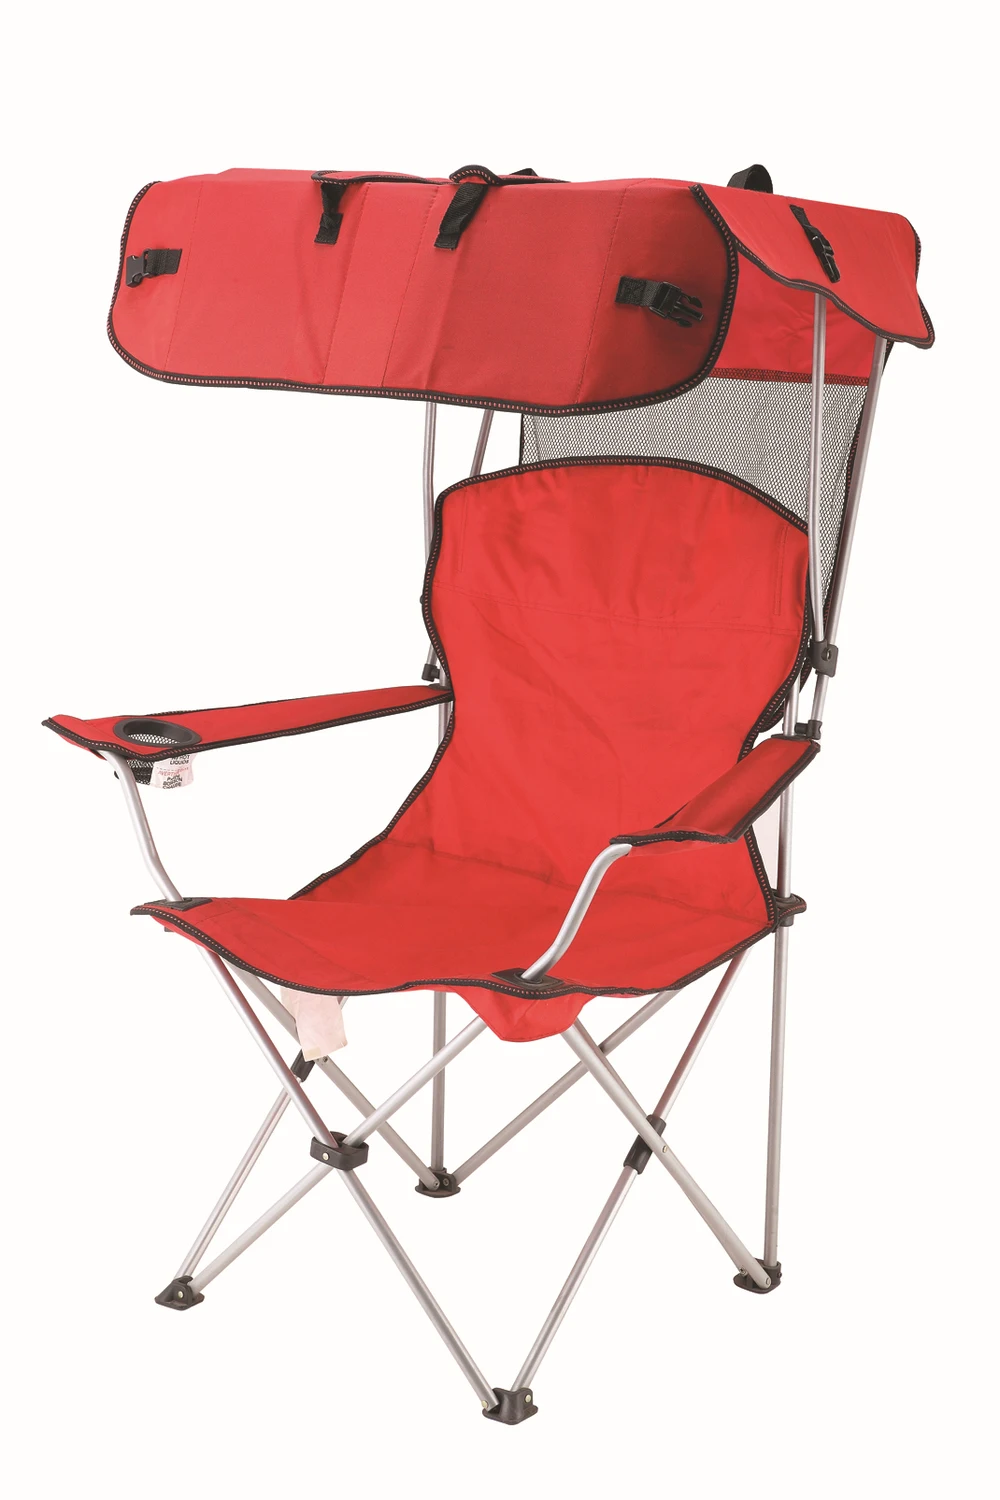 Camp Chair With Canopy Camping Chairs Outdoor Beach Chairs Portable